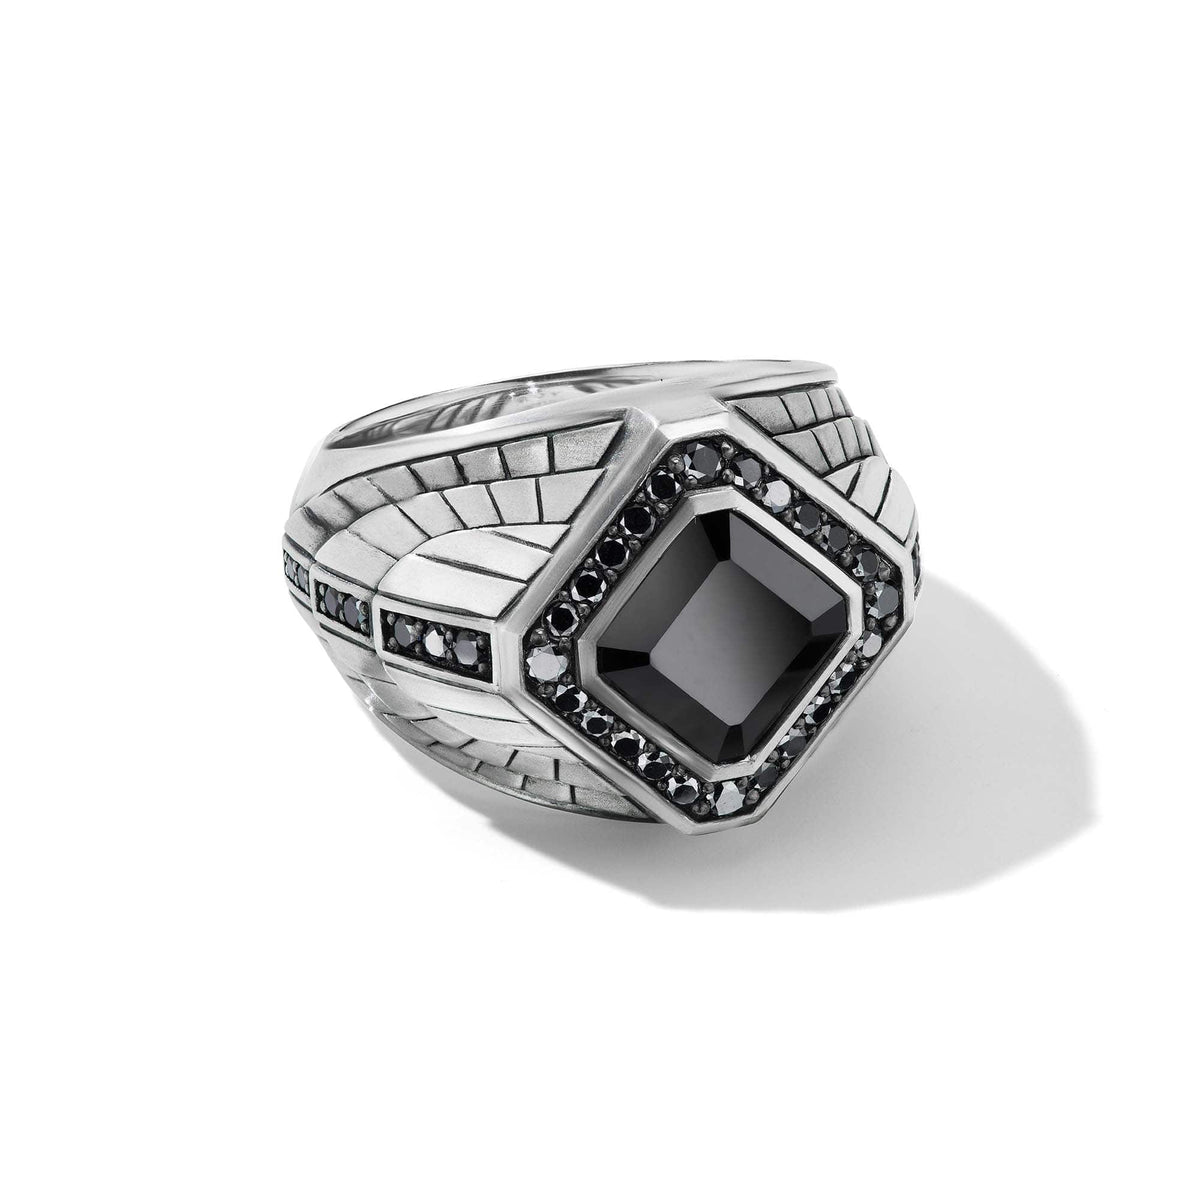 Empire Signet Ring with Black Onyx Black Diamonds, Sterling Silver, Long's Jewelers